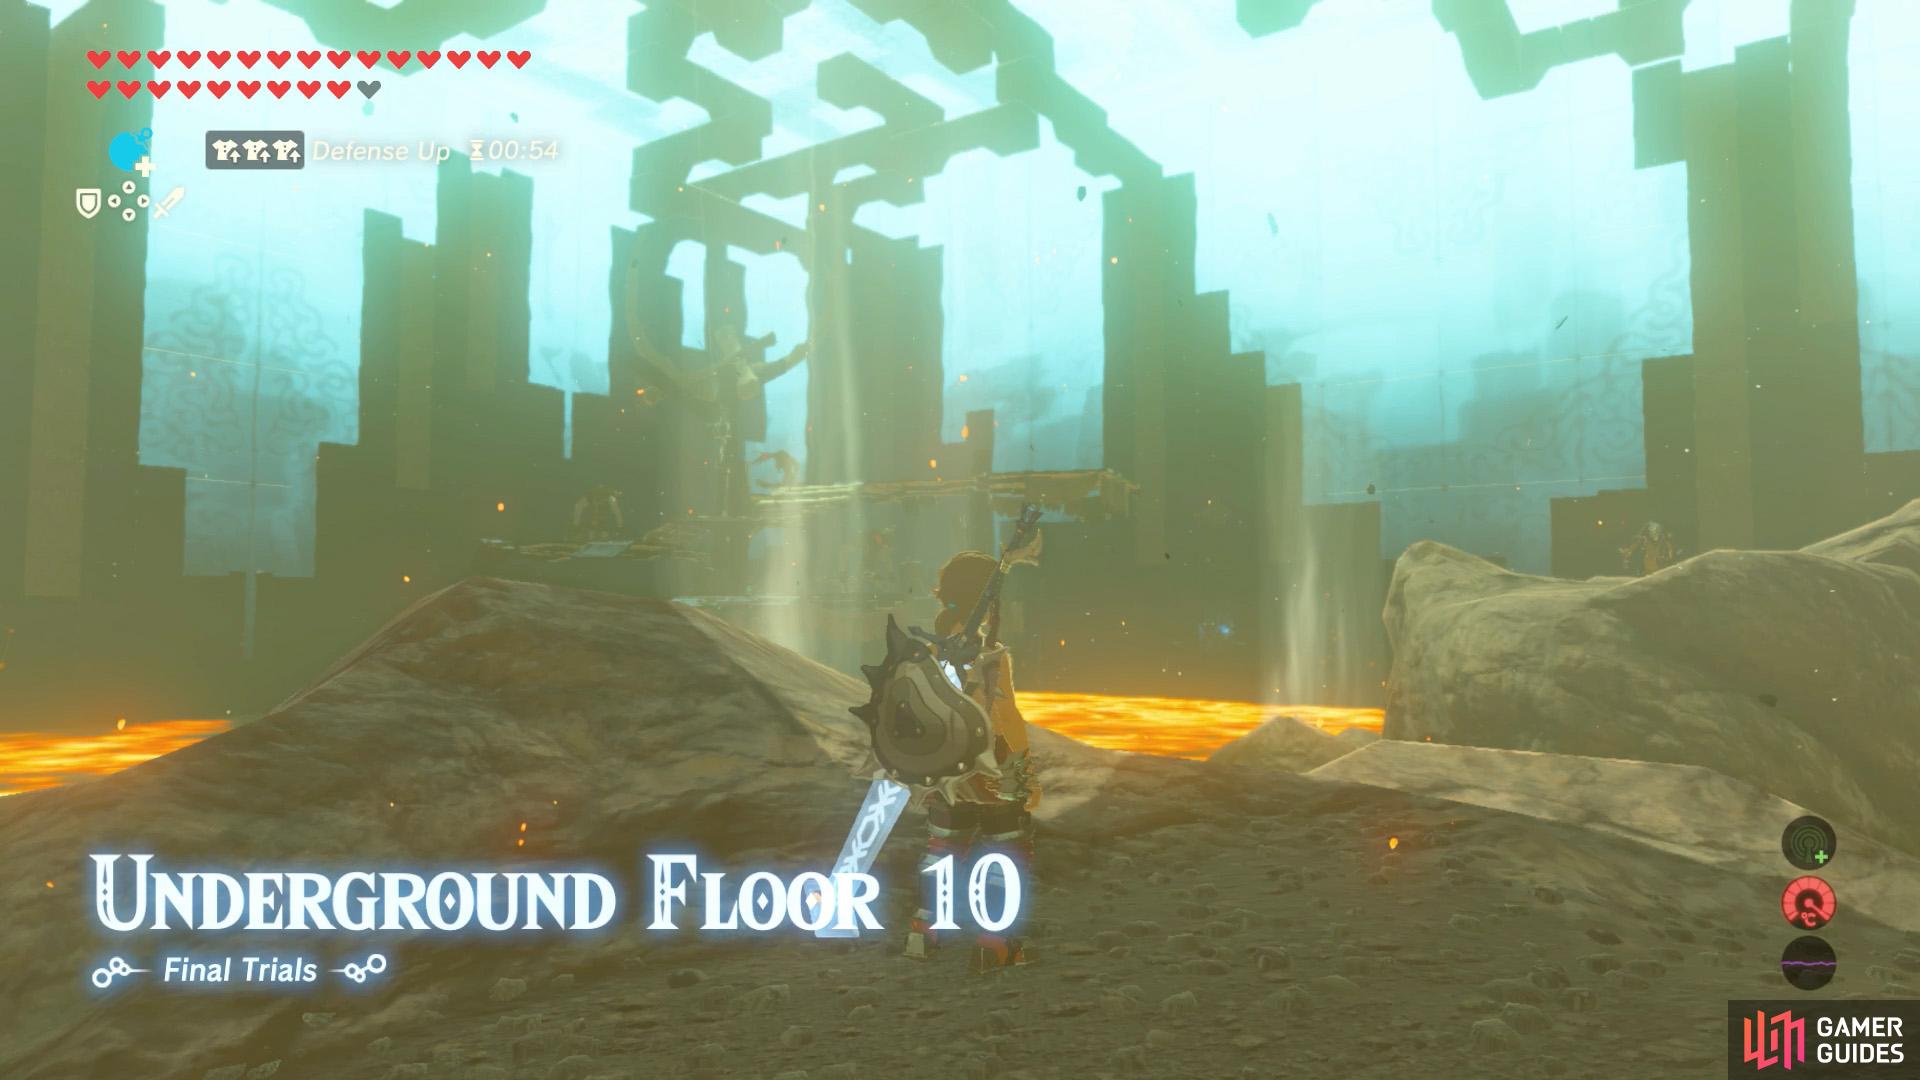 A Moblin encampment is located across the sea of lava.